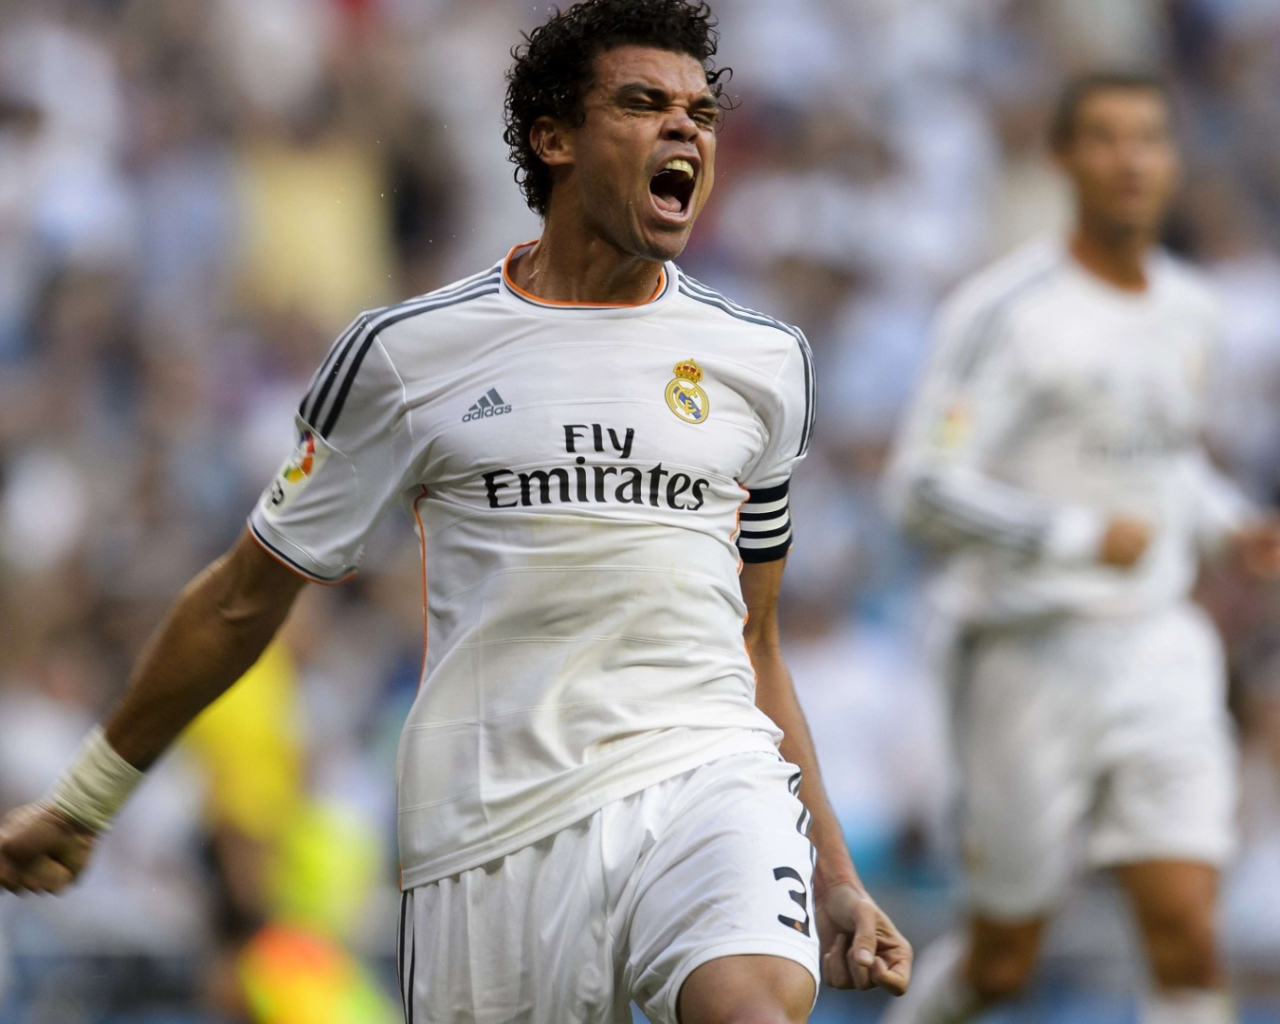 Real Madrid Pepe is shouting